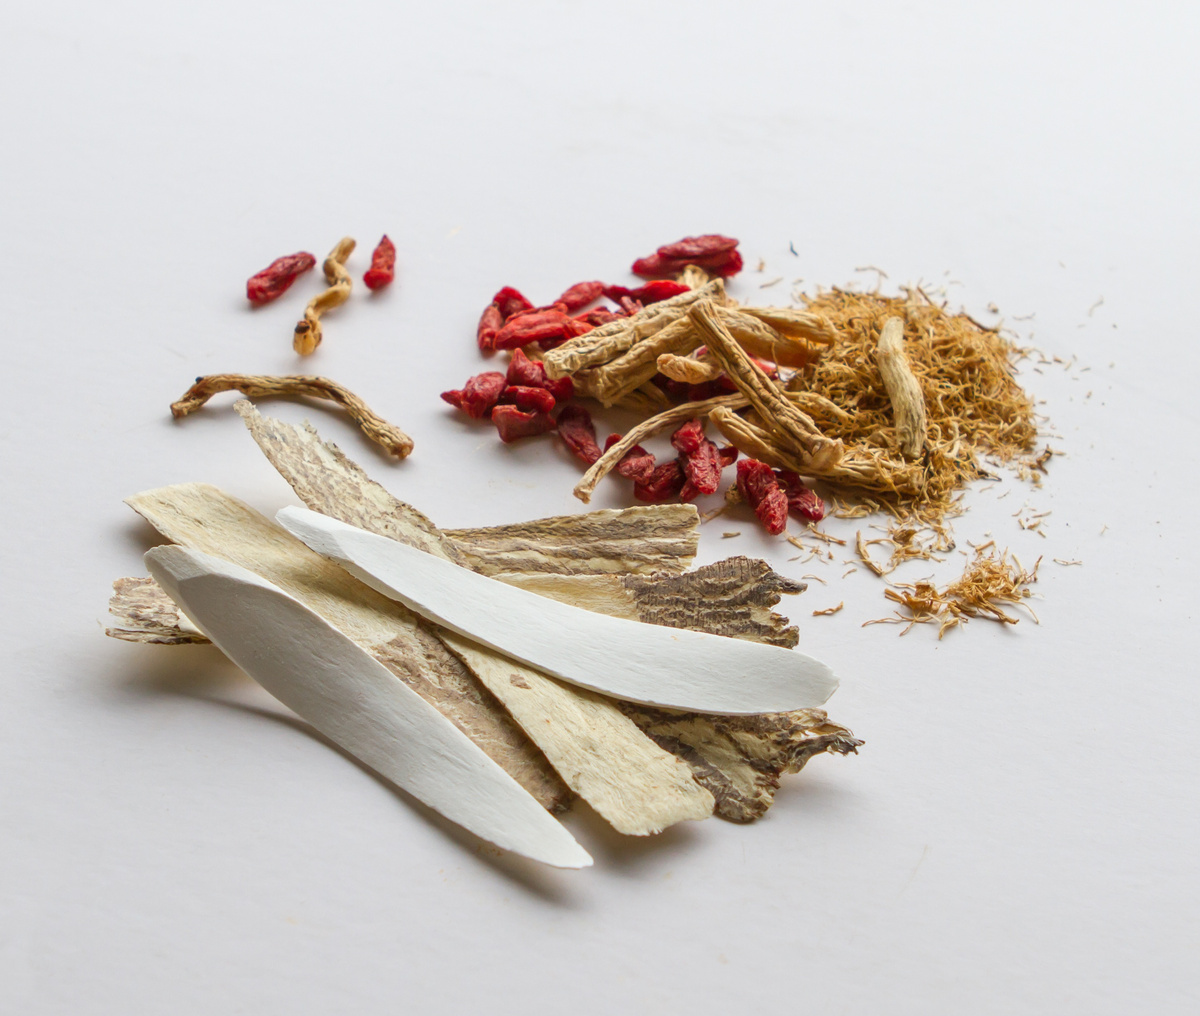 Chinese herbs on white table